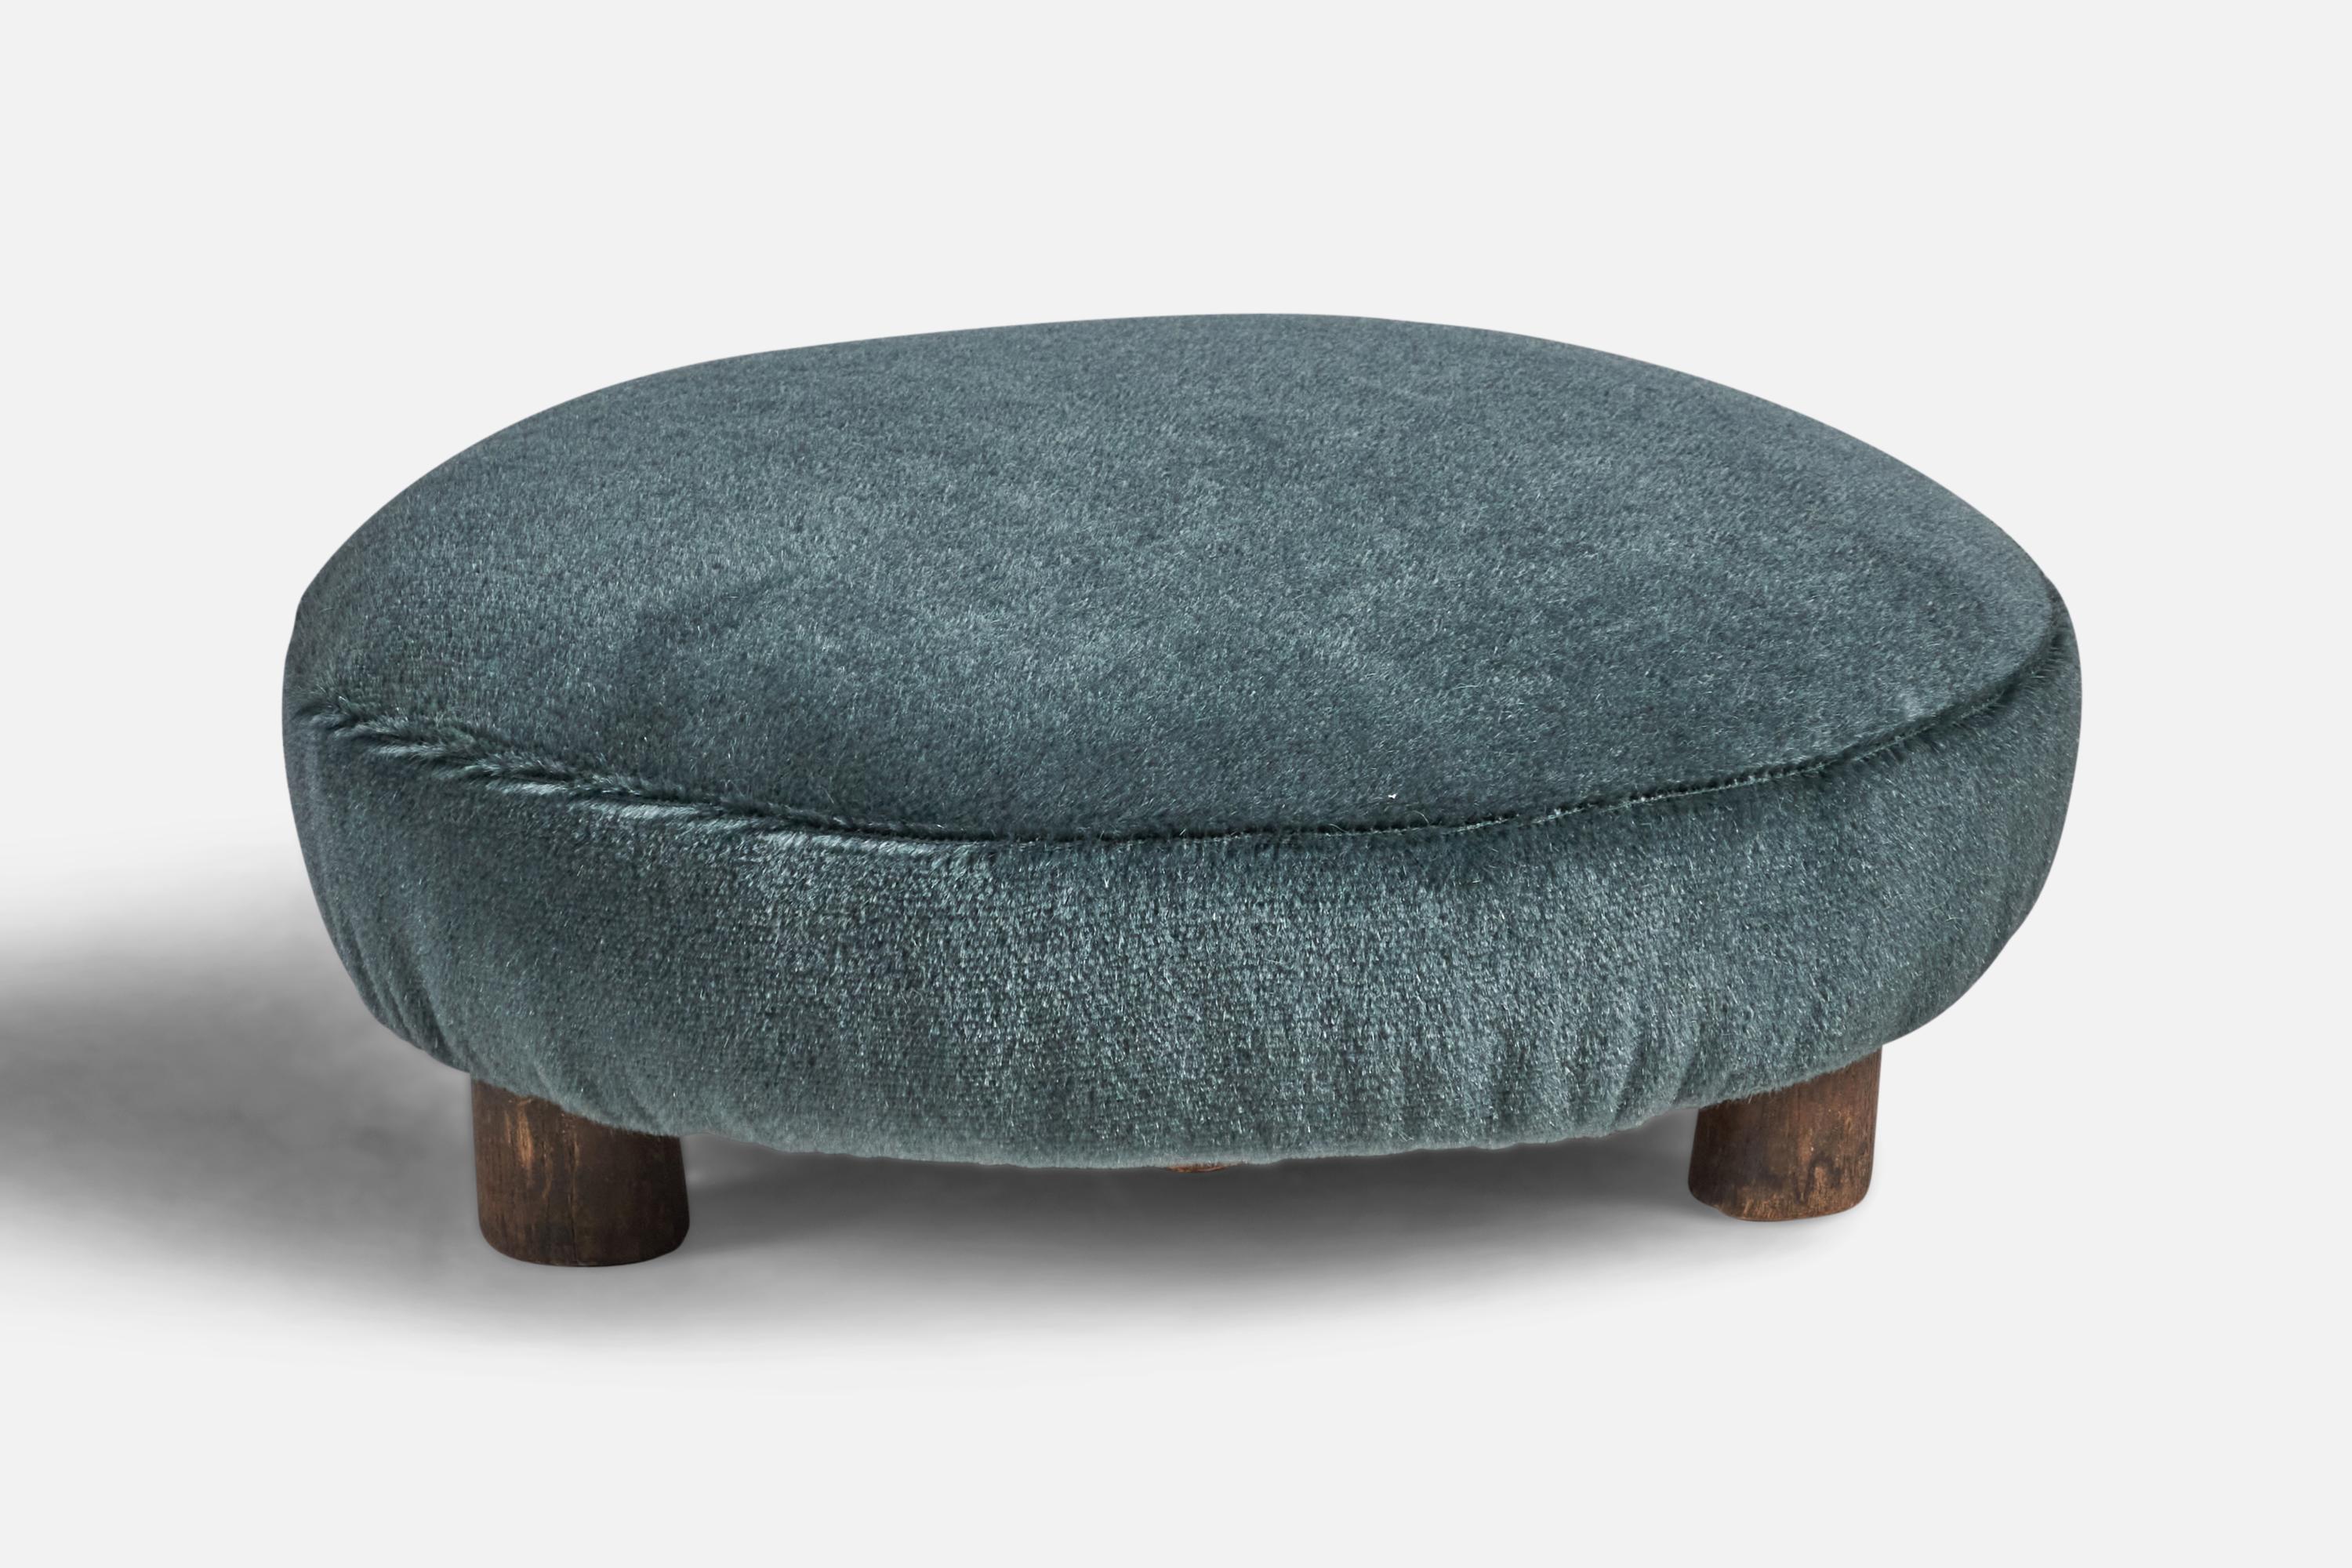 A small blue mohair ottoman or stool designed and produced in Italy, 1930s.
